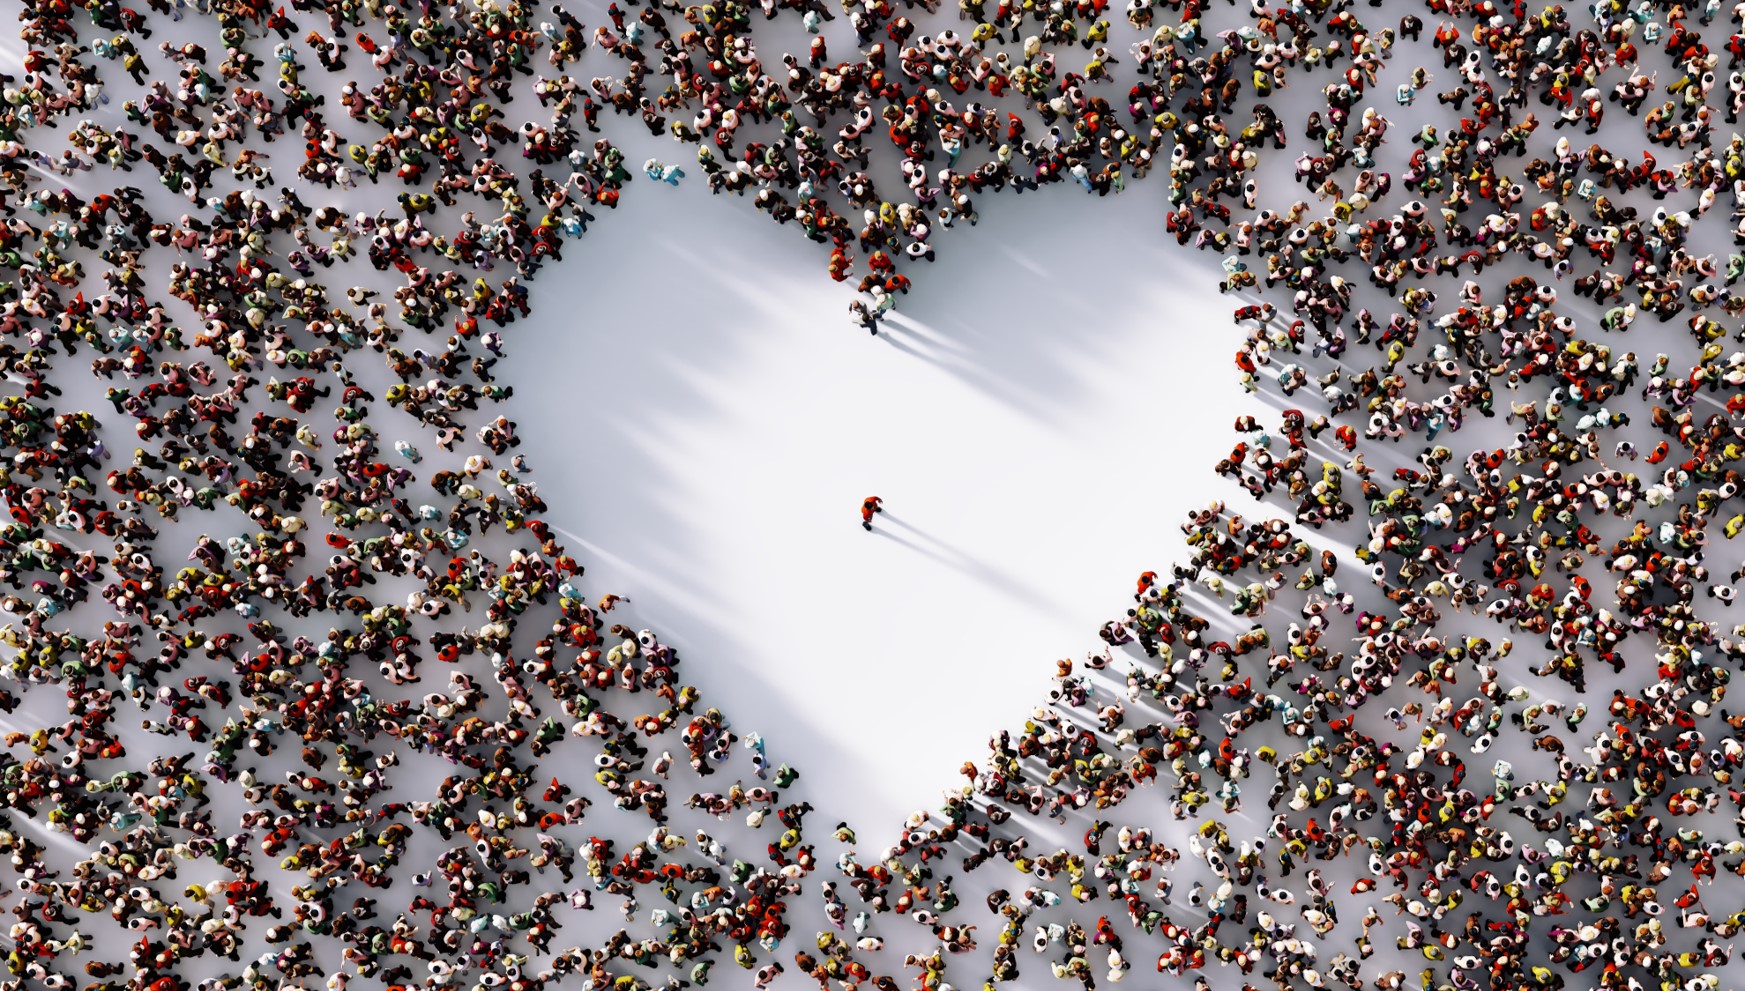 Heart created by people